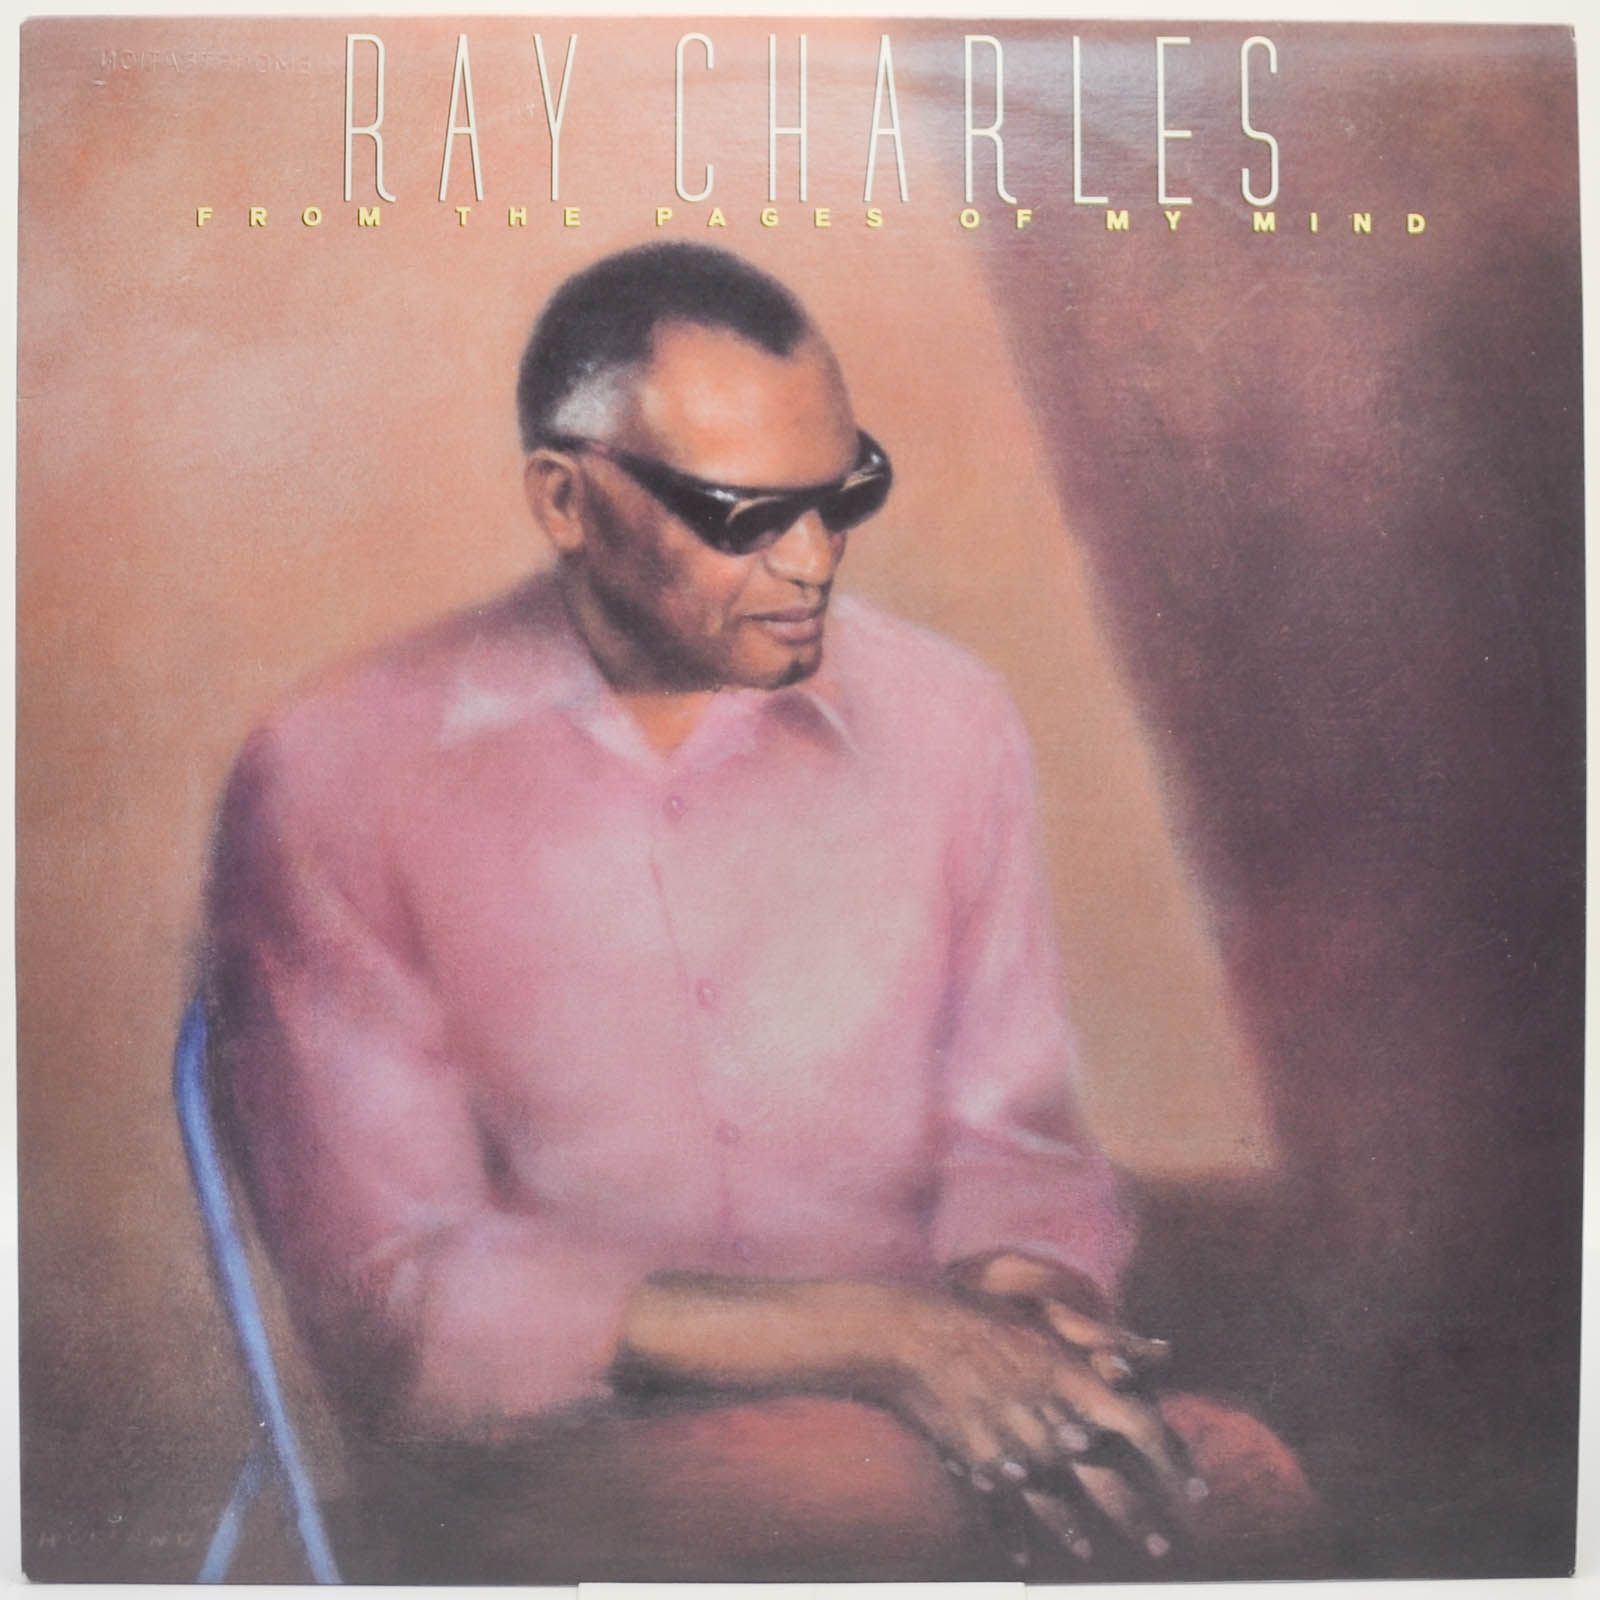 Ray Charles — From The Pages Of My Mind, 1986